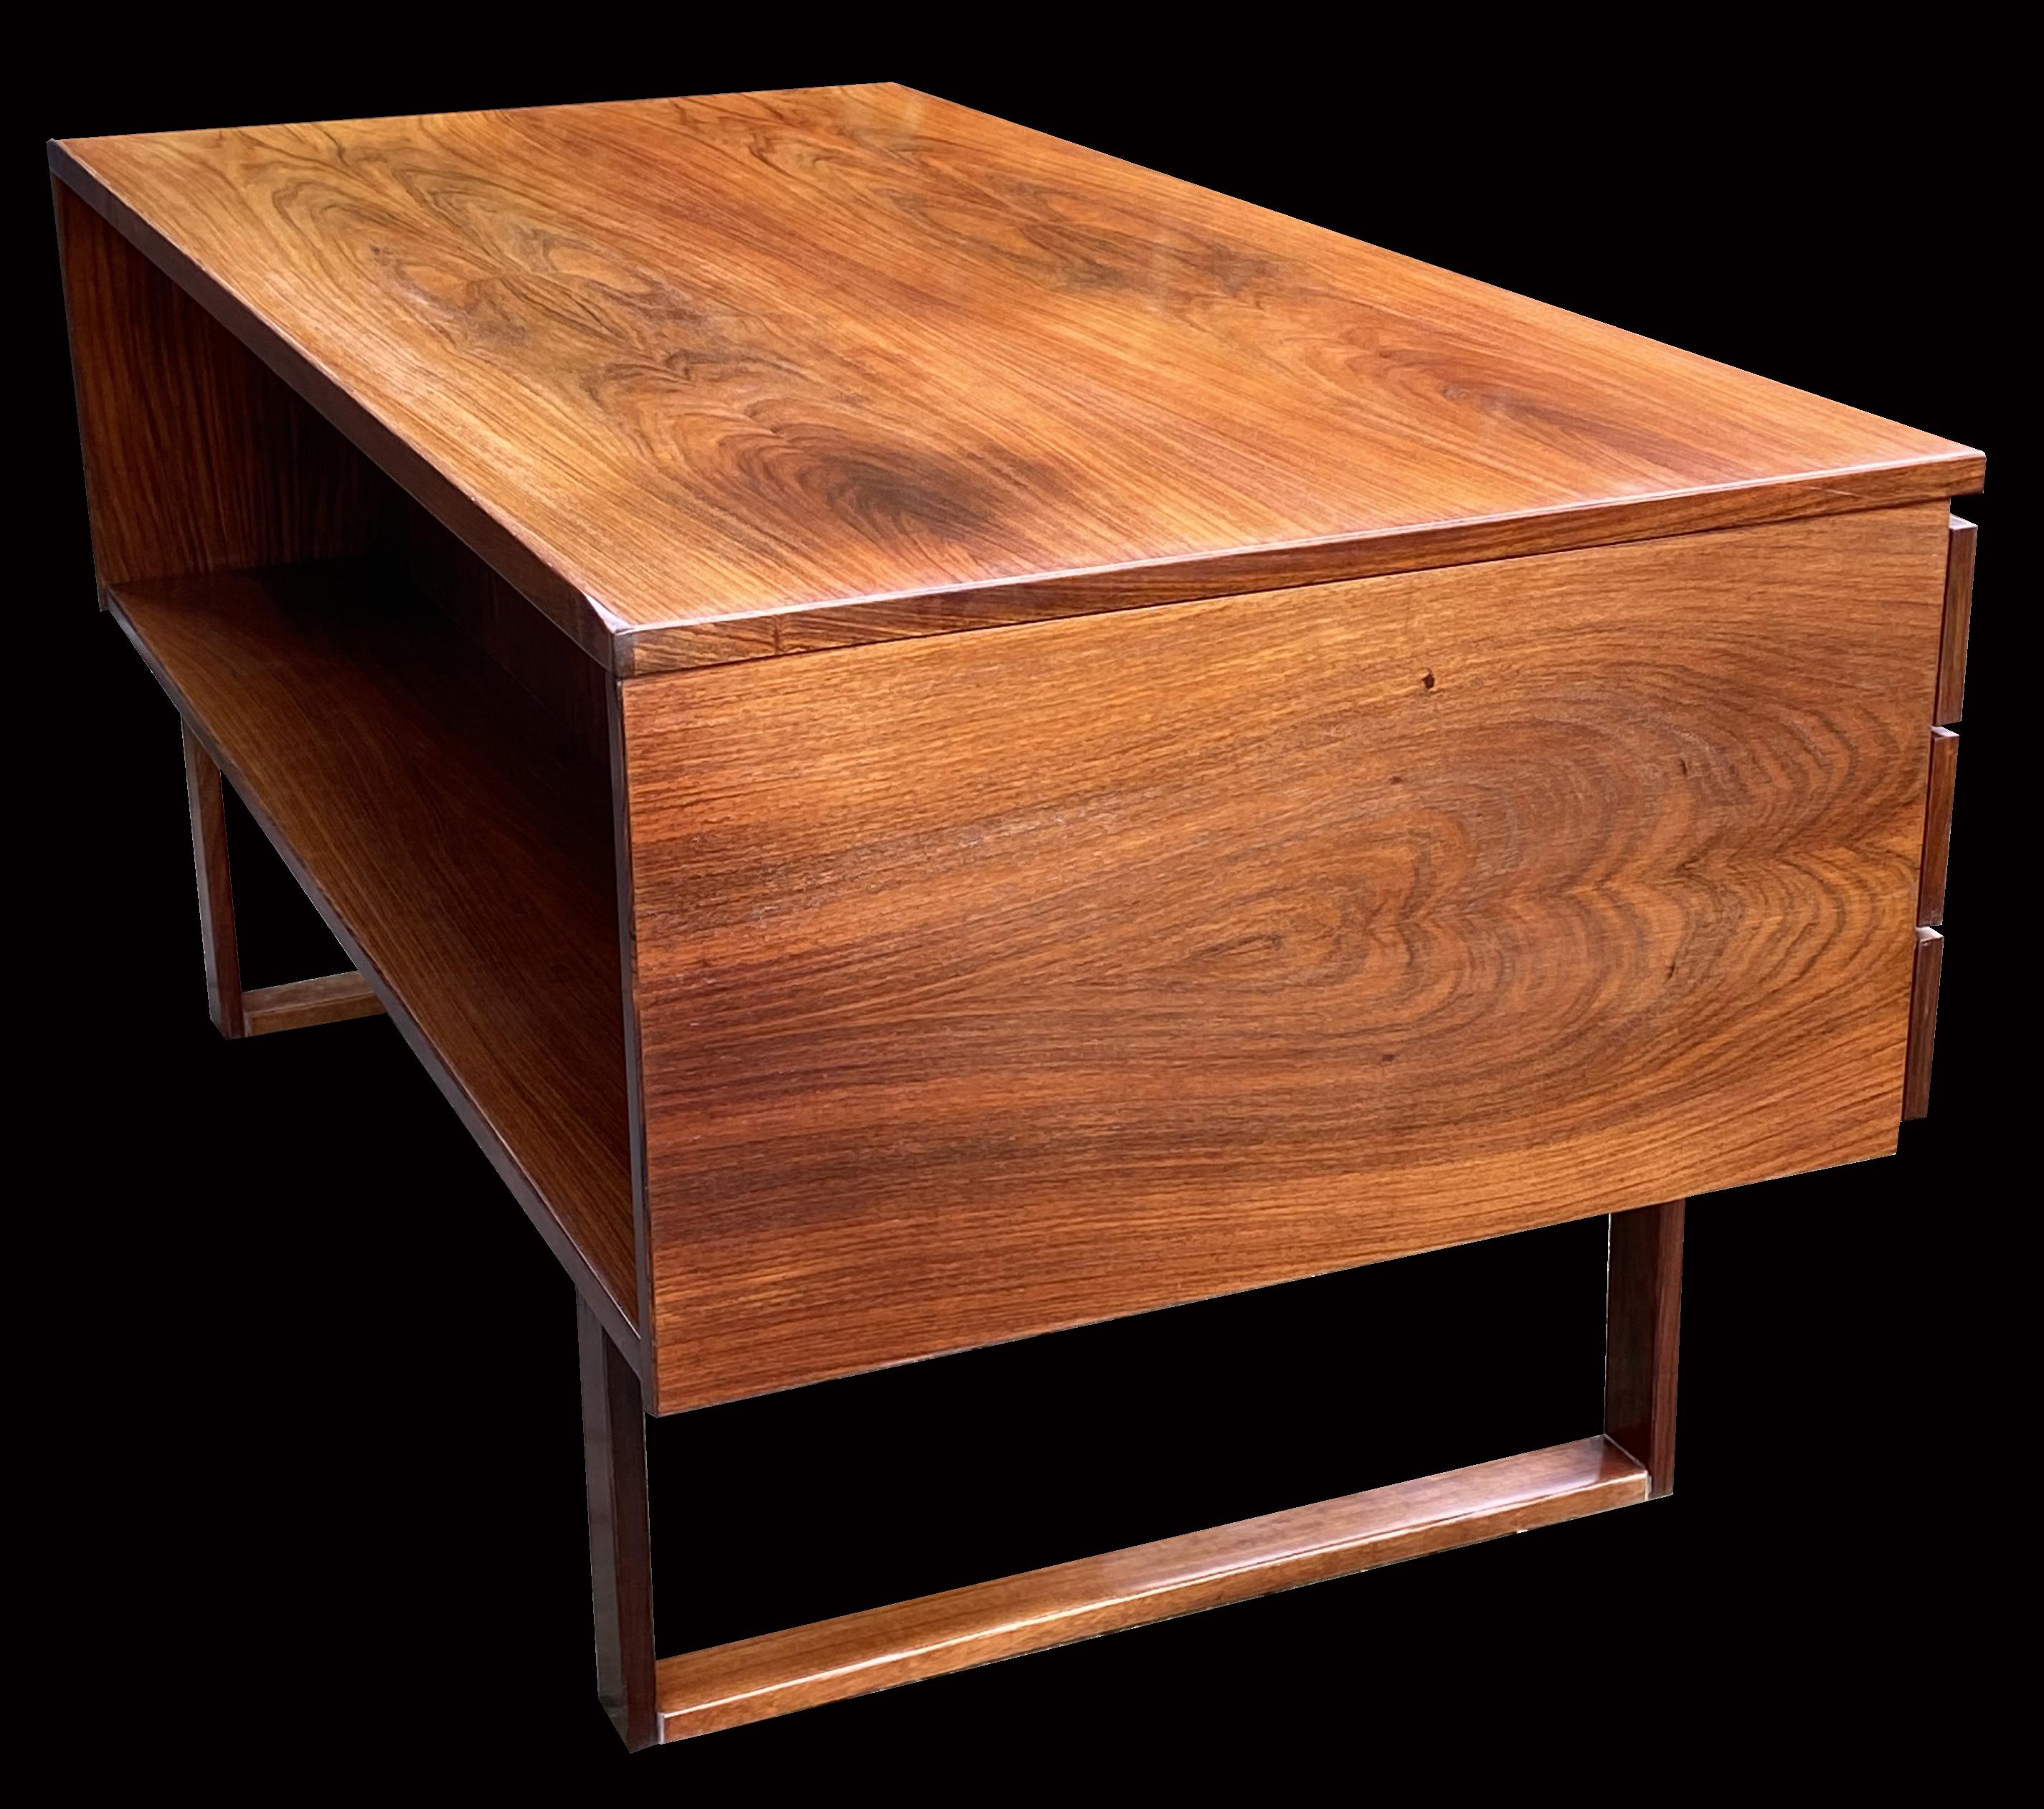 A very nice classic Scandinavian Modern Santos rosewood desk.
Santos rosewood (Machaerium Scleroxylon) is not on the Cites list, so there is no problem with import or export.